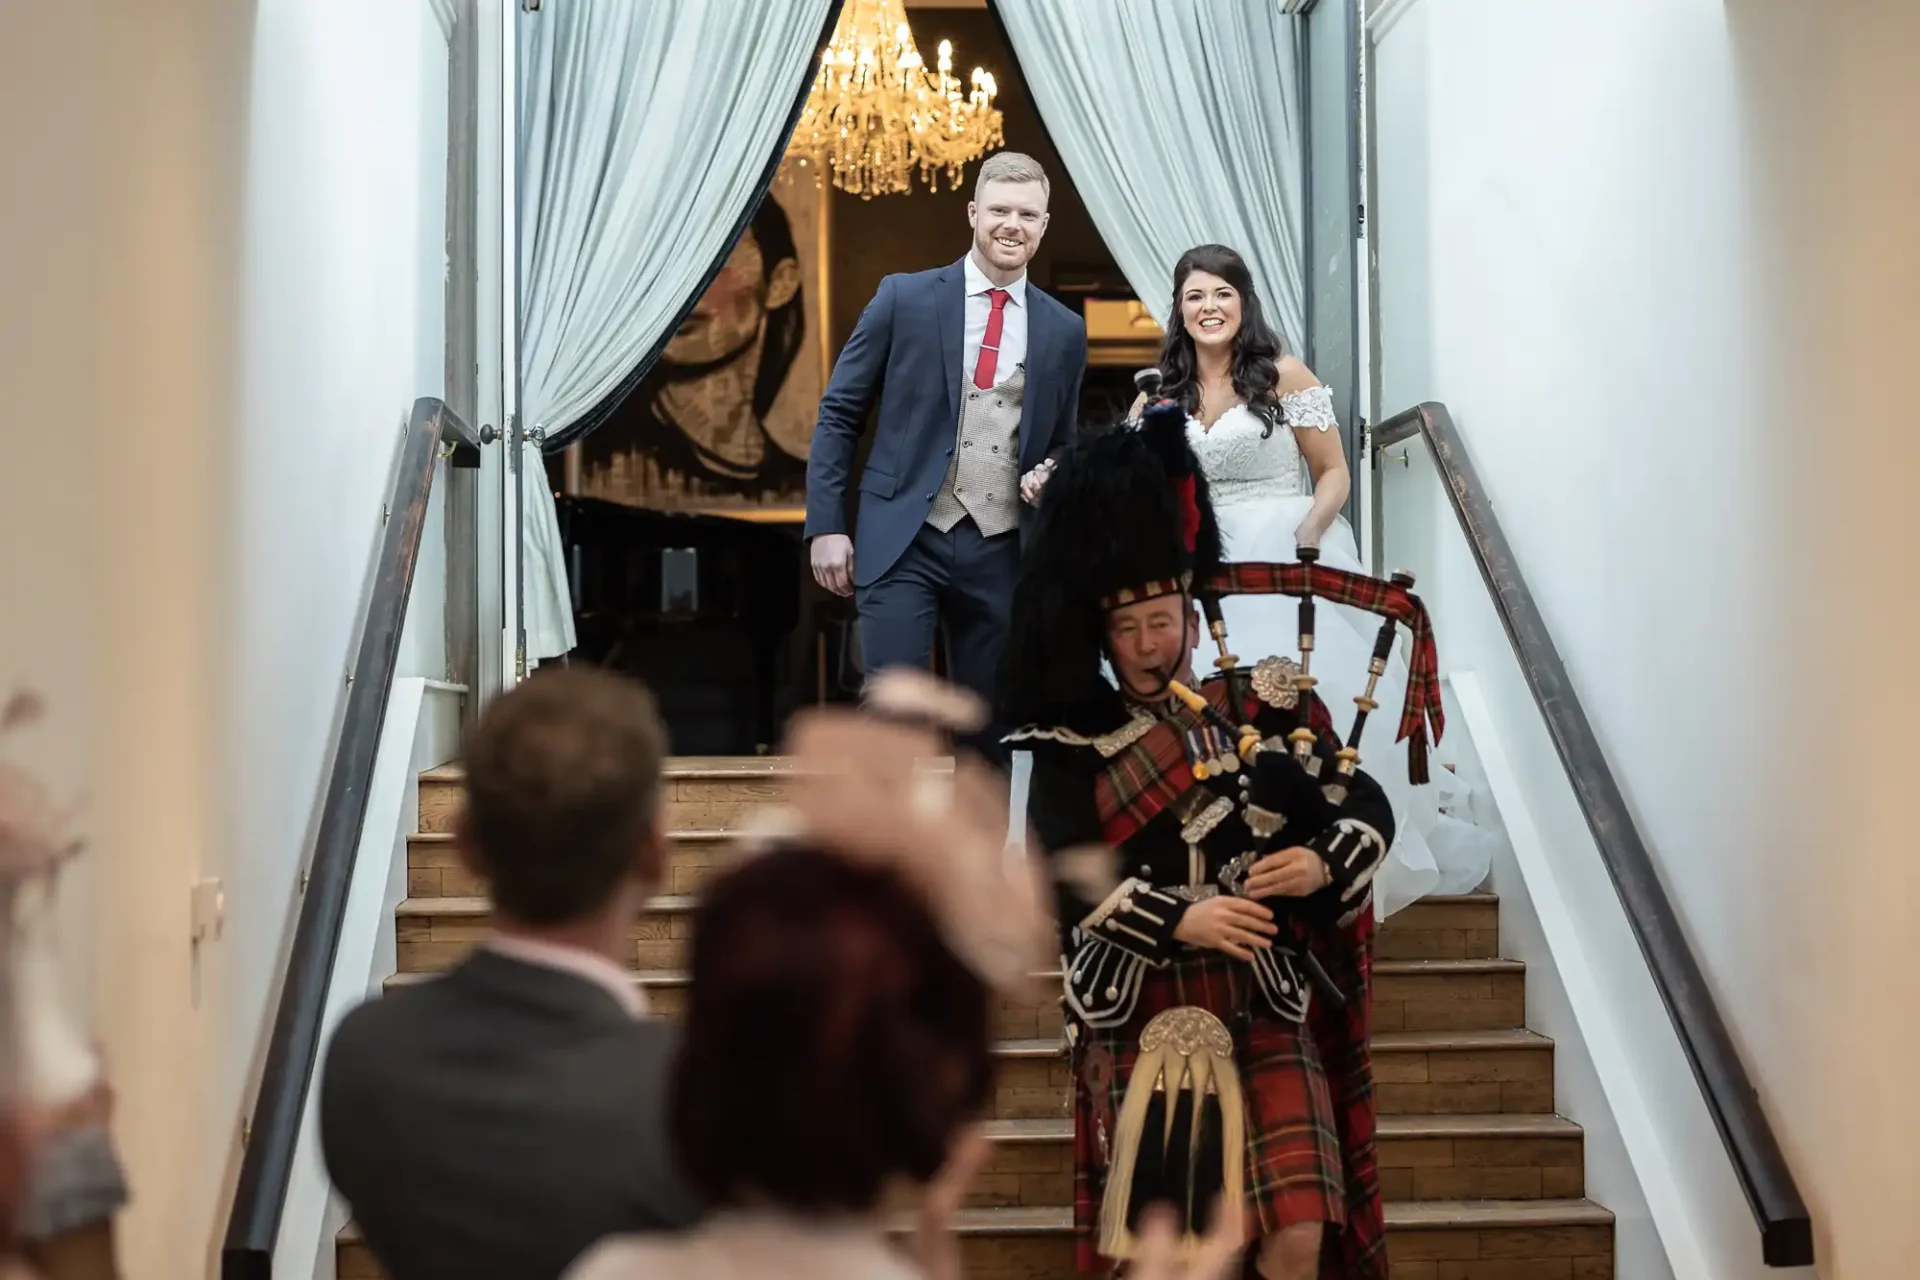 A bride and groom smiling as they descend a staircase with a bagpiper in scottish attire playing at the foreground, with guests clapping.